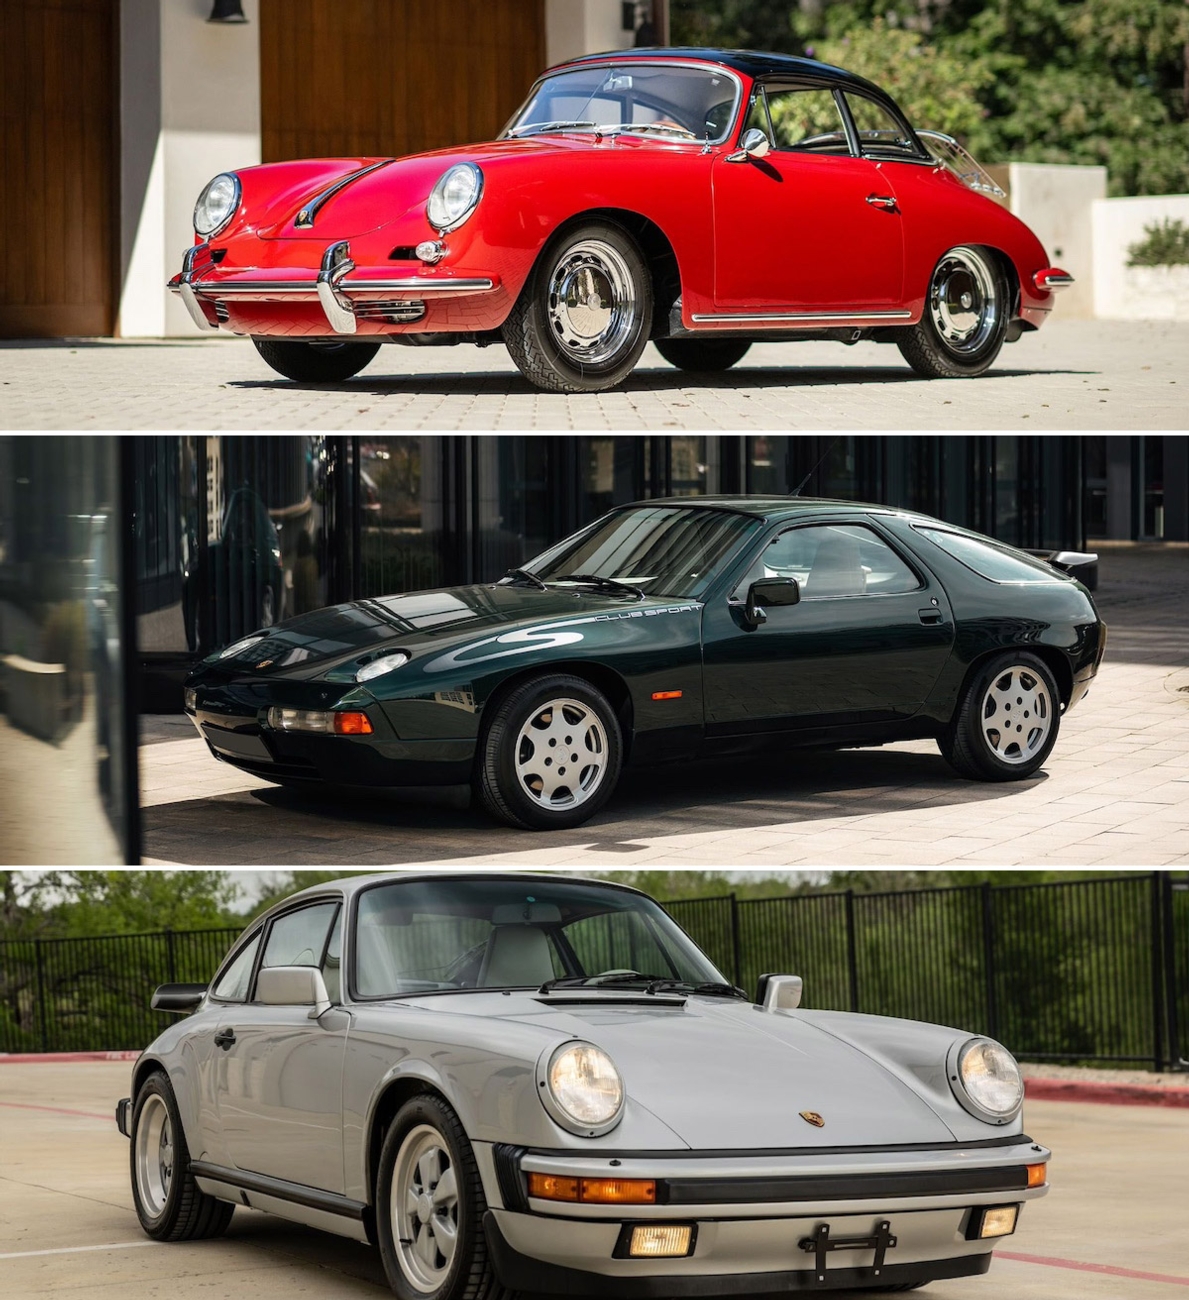 Porsche Club of America - Porsches we’re watching at the Broad Arrow Air/Water Auction